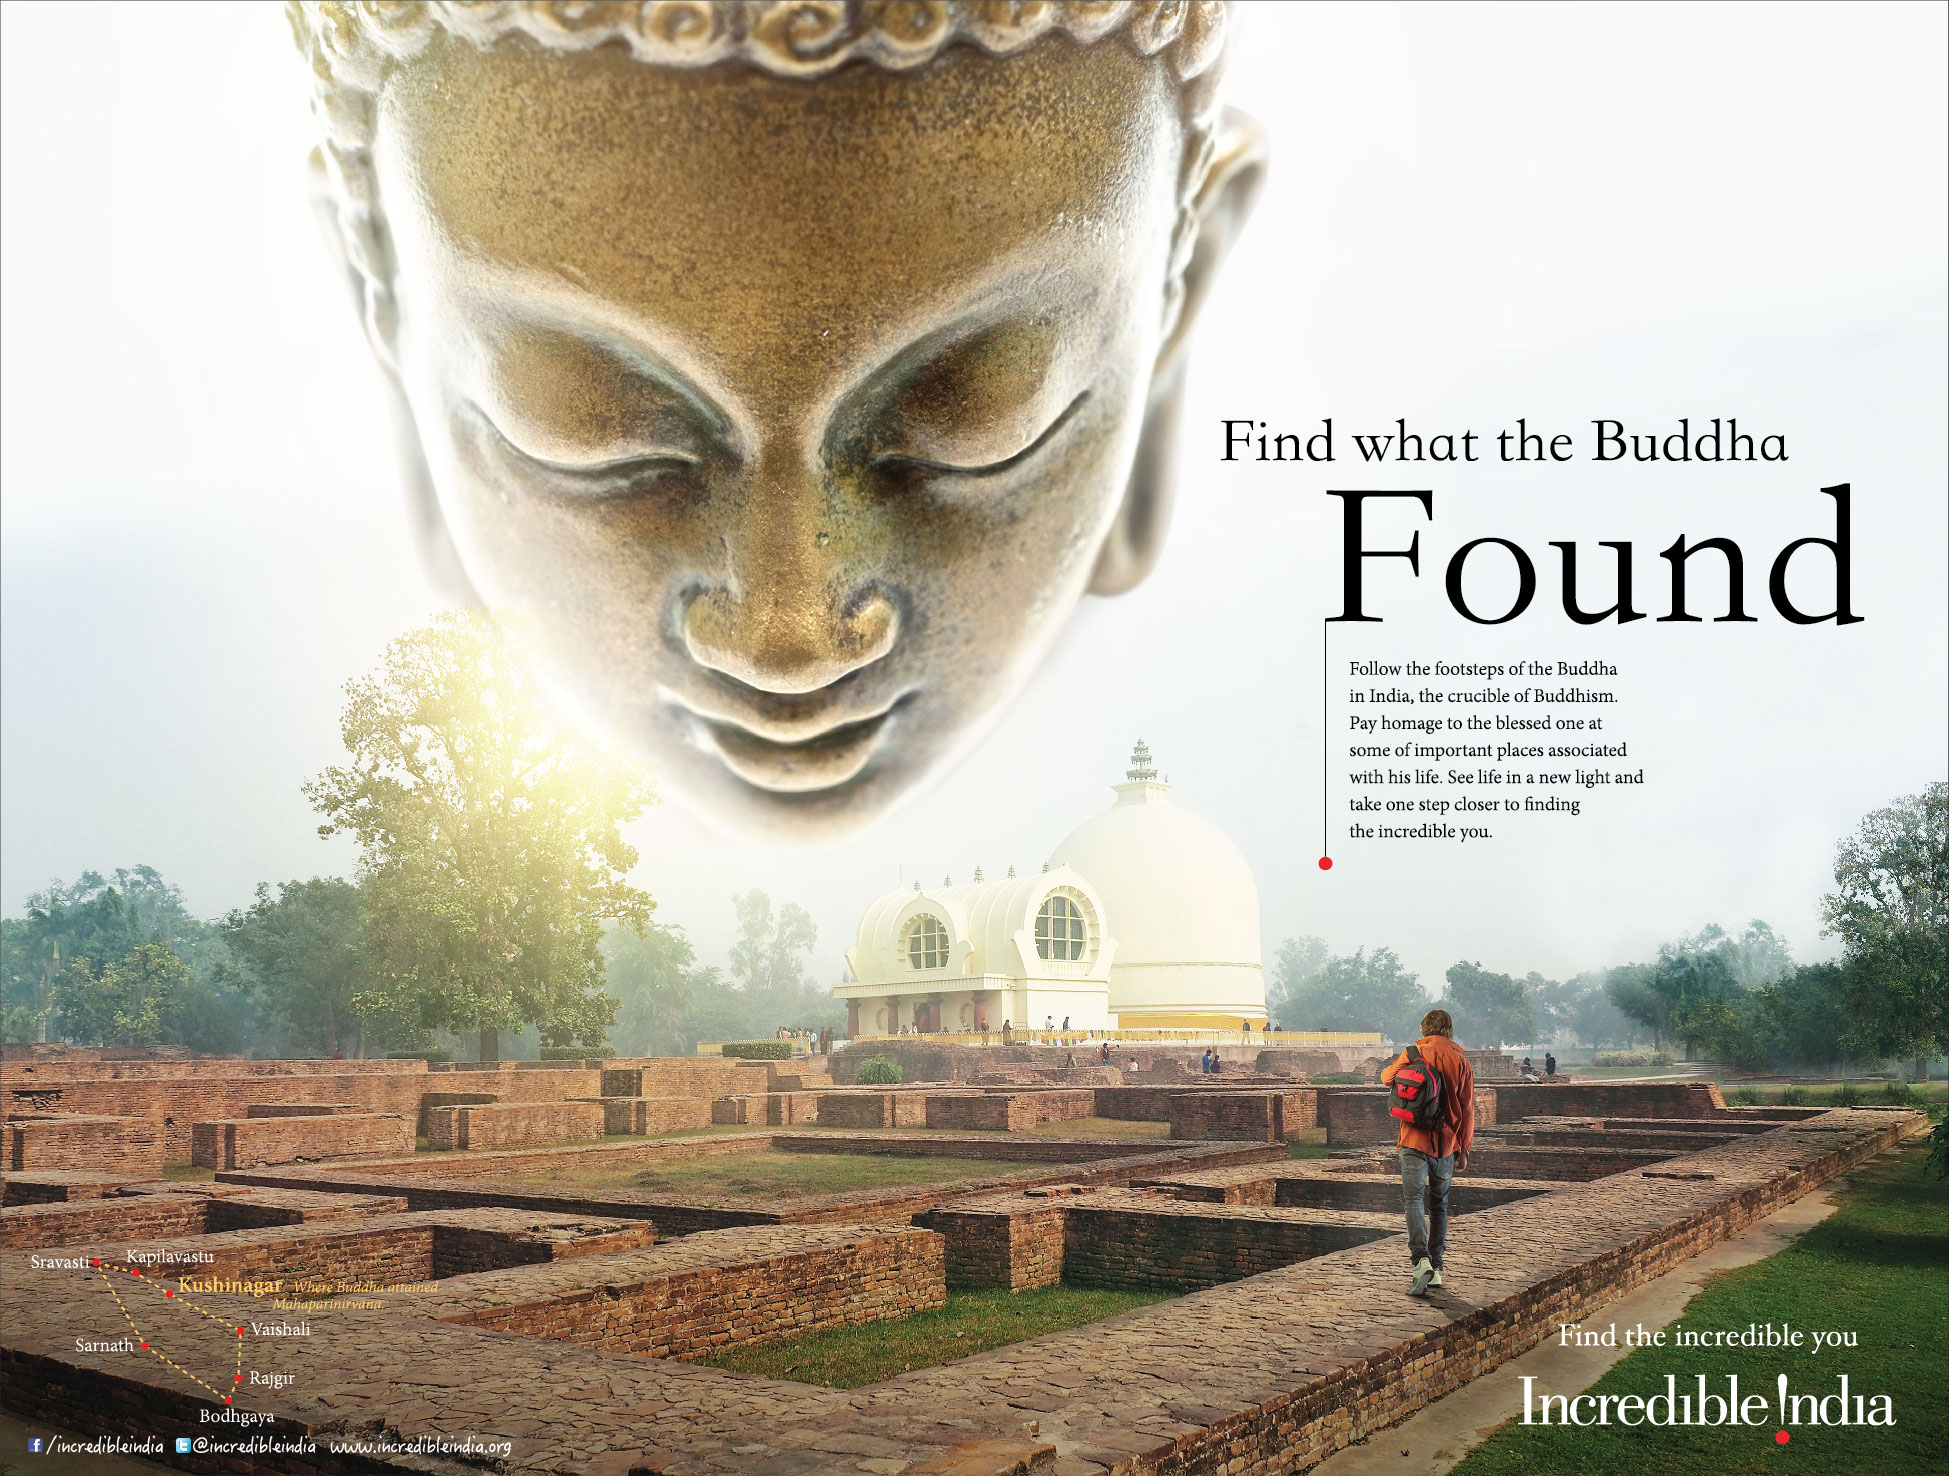 Follow the Steps of Buddha - Incredible India | Print mock-up 1 by Stark Communications Pvt Ltd